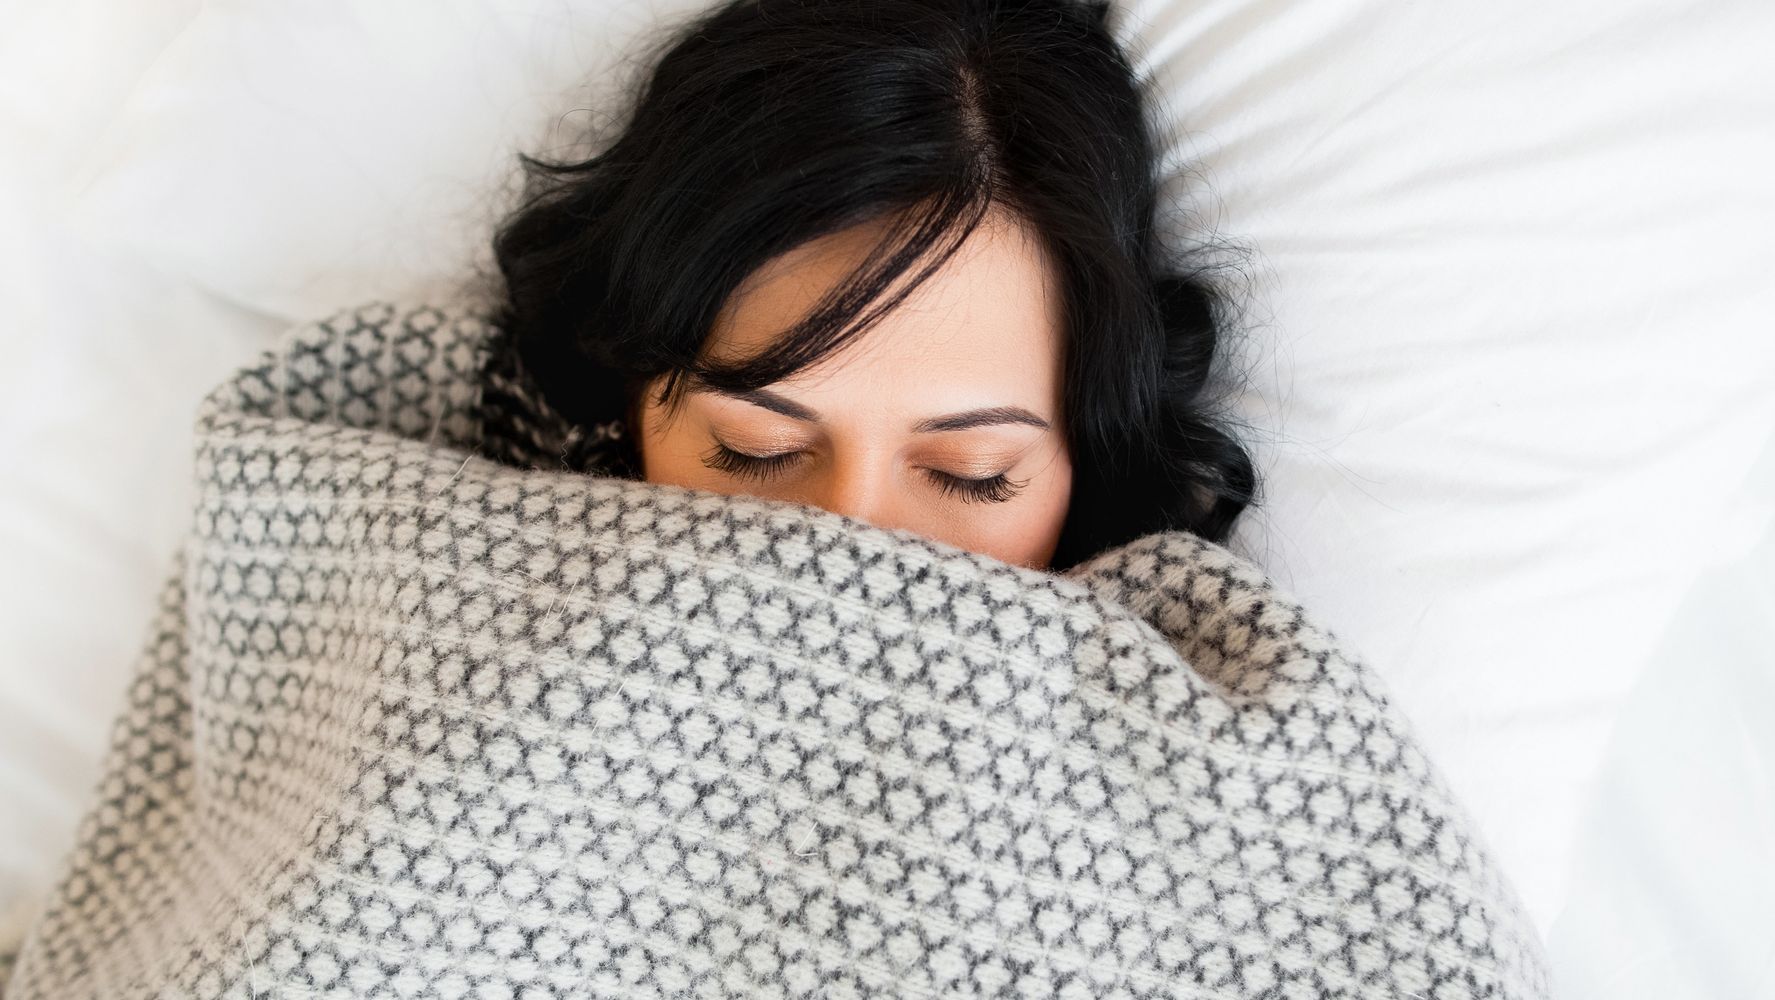 What Are Weighted Blankets And Can They Help With Insomnia And Anxiety